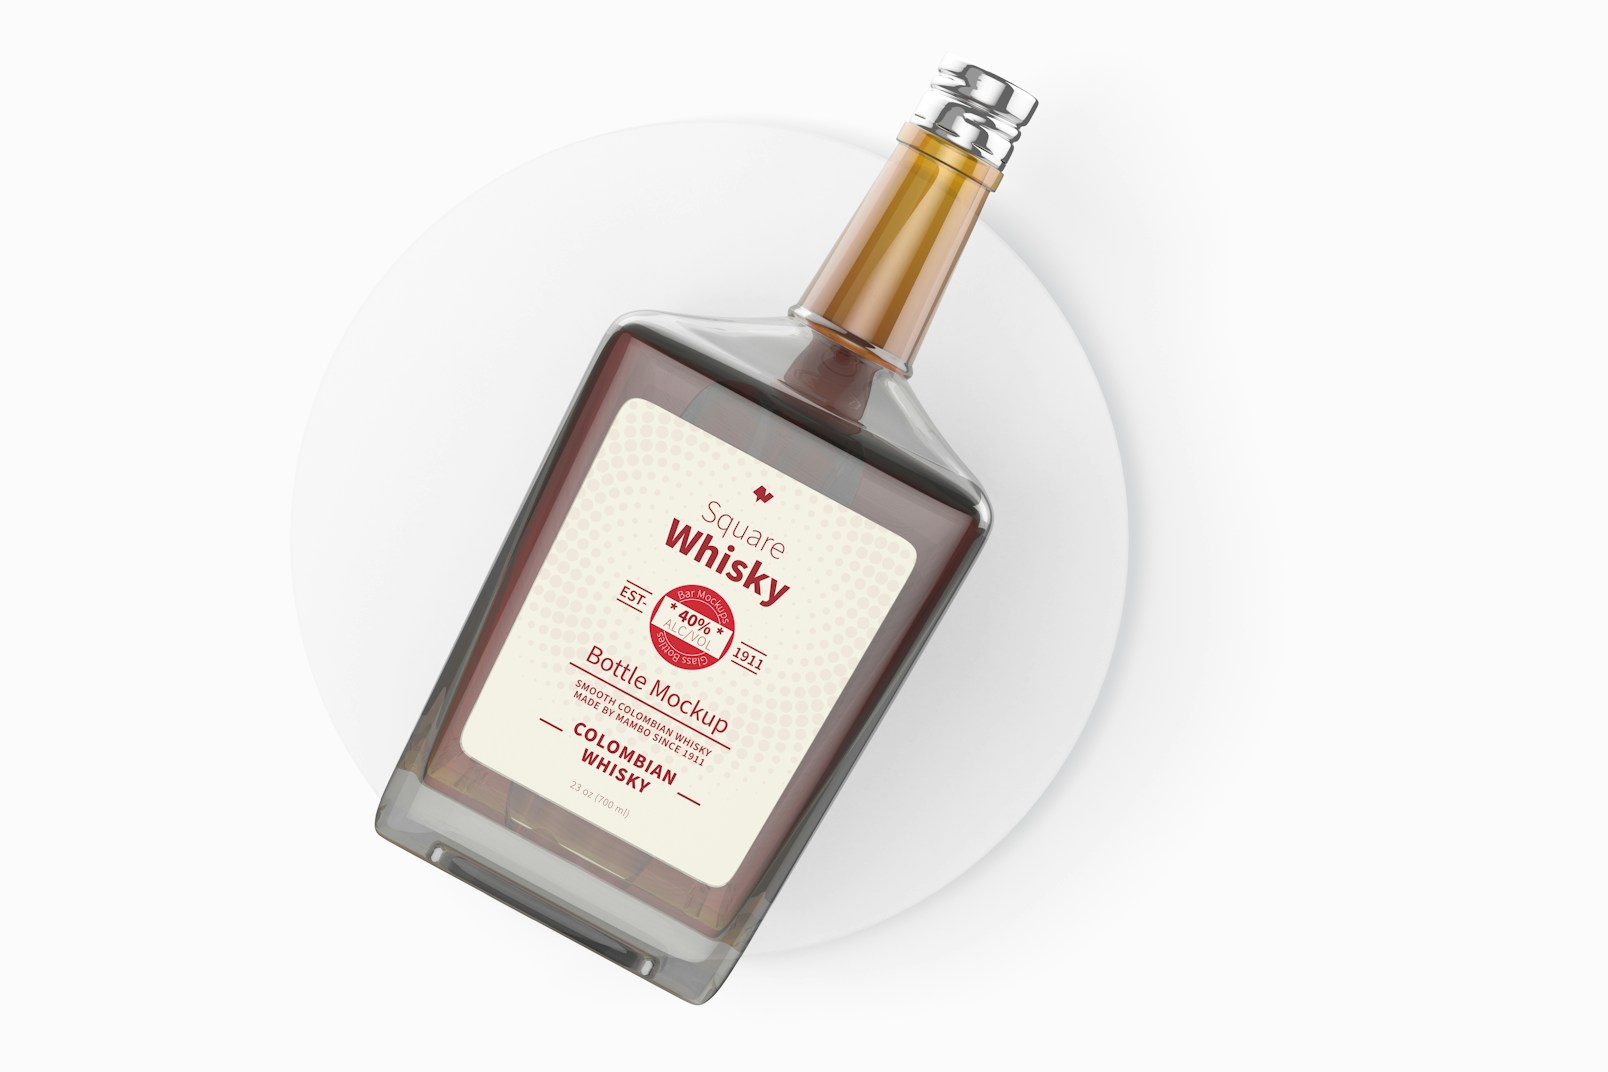 Square Whisky Bottle Mockup, Top View